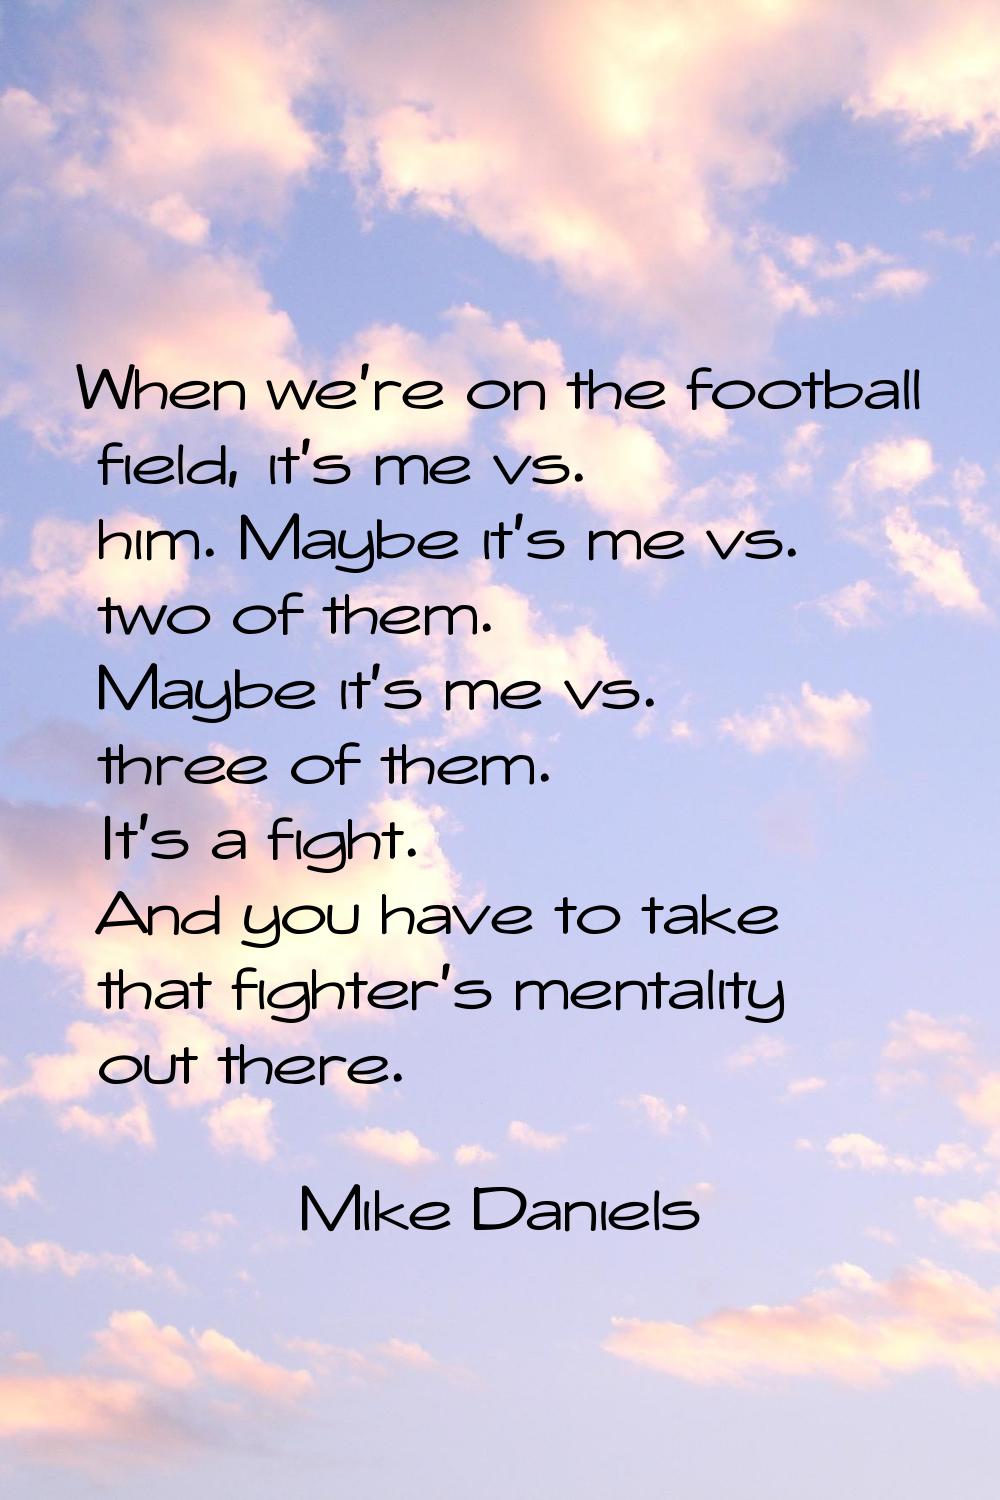 When we're on the football field, it's me vs. him. Maybe it's me vs. two of them. Maybe it's me vs.